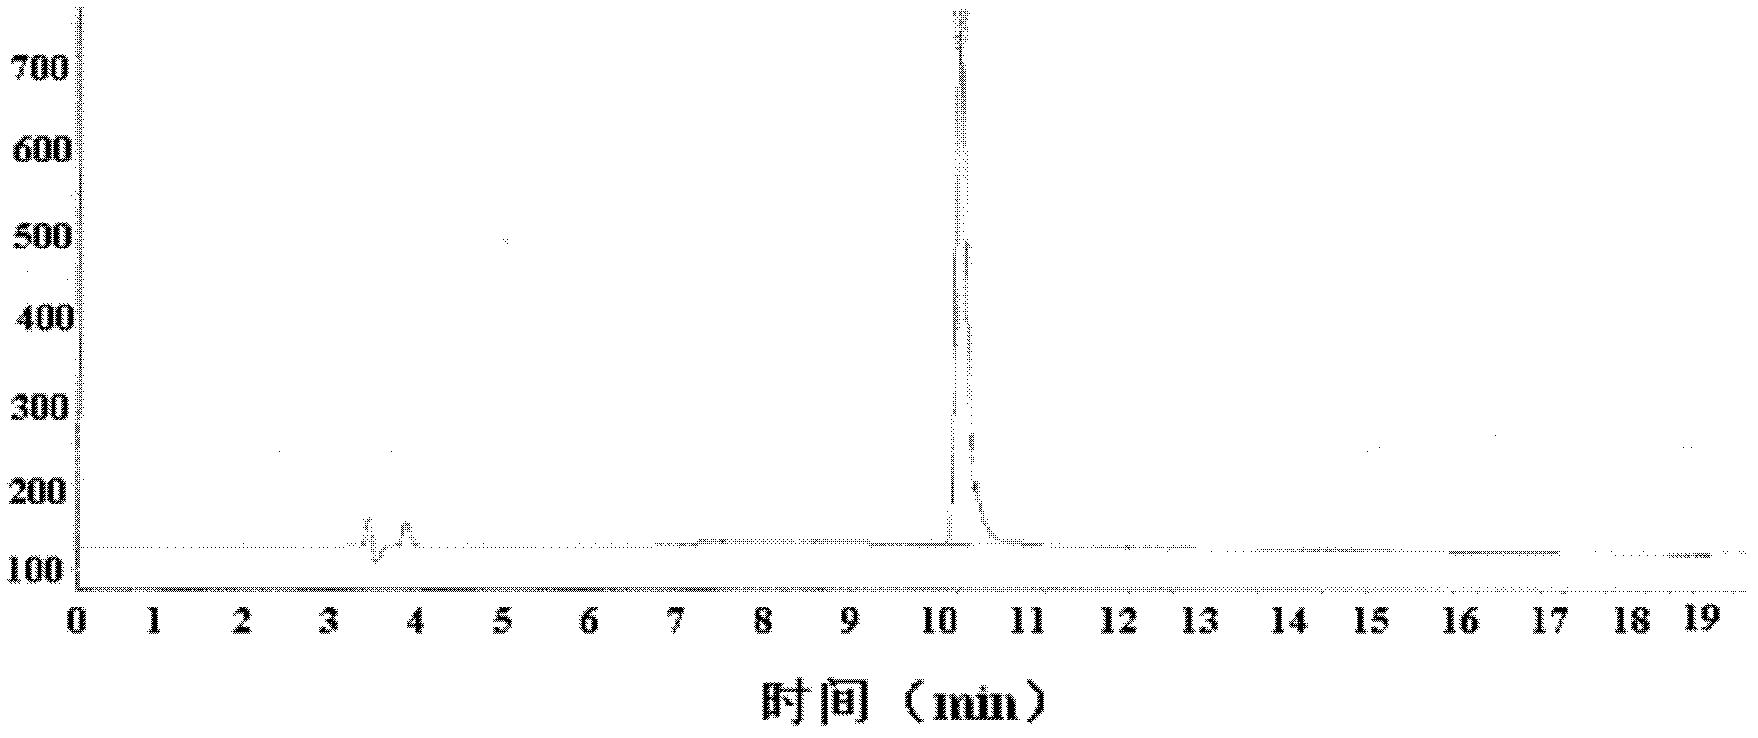 Polypeptide carrier used for improving targeting ability and transfection efficiency of medicine/gene, and purpose thereof